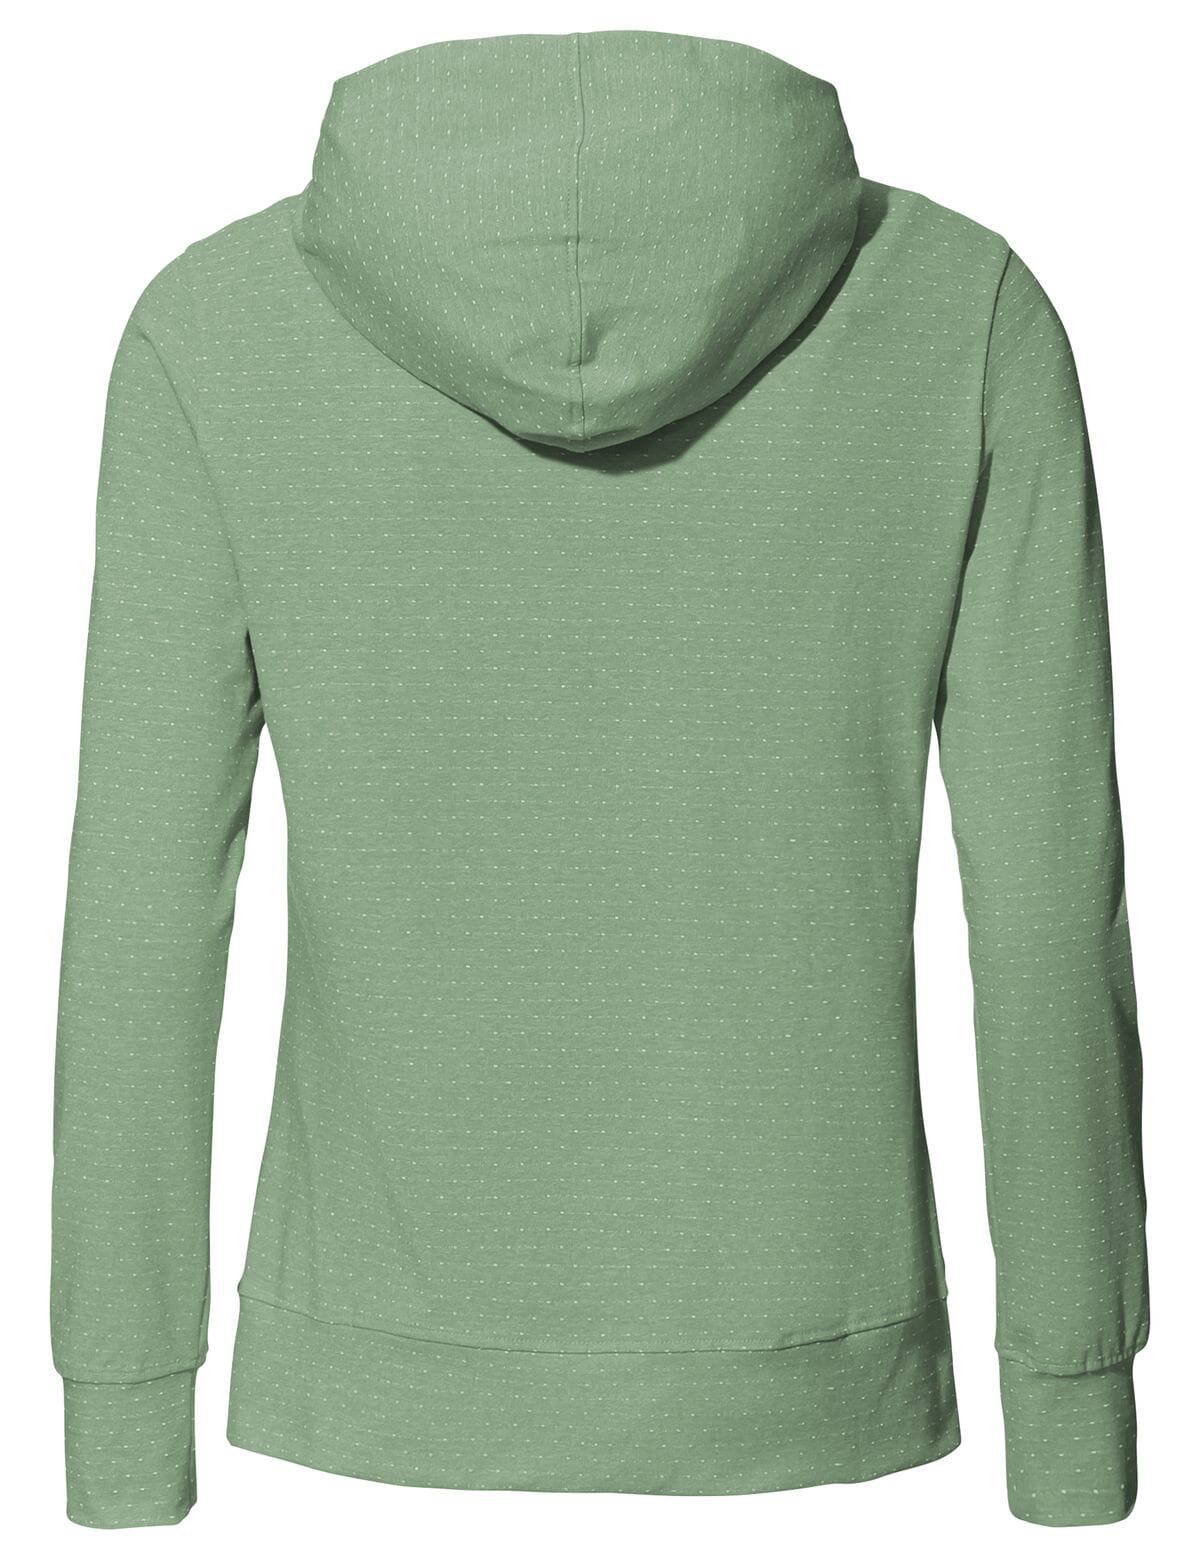 Vaude - W's Tuenno Pullover - Organic Cotton & Recycled Polyester - Weekendbee - sustainable sportswear